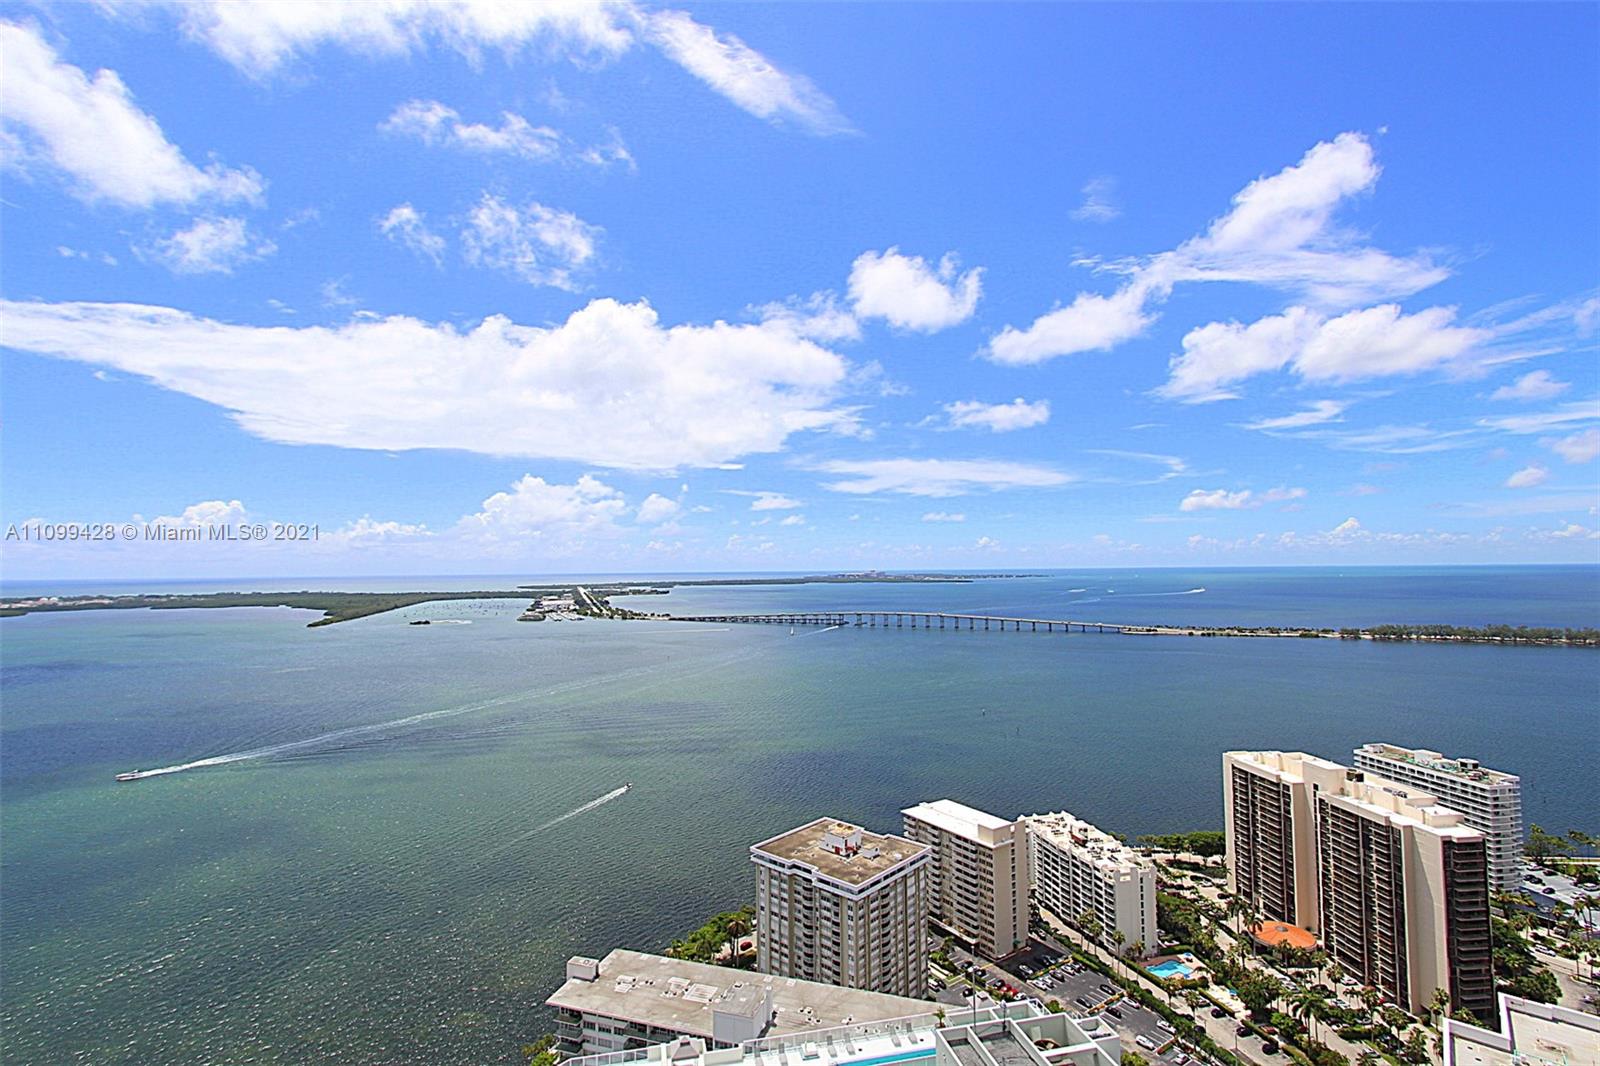 Sweeping & unobstructed water views from this 43rd floor penthouse located in the Brickell House Condo! Built in 2014, this magnificent high rise offers high end amenities which include 2 pools, gym, spa and valet service. Double main entry way foyer leads you to an ample and open main living area with floor to ceiling glass throughout. Water views can be had from almost all areas of this unit. Split floor plan provides a well-appointed master suite including enormous walk-in closet, master bathroom with soaking tub, separate shower and double sink vanity. Maids quarter next to laundry area. Balcony spans the complete length of unit with access points from all rooms. This is a one of a kind unit not to be missed!